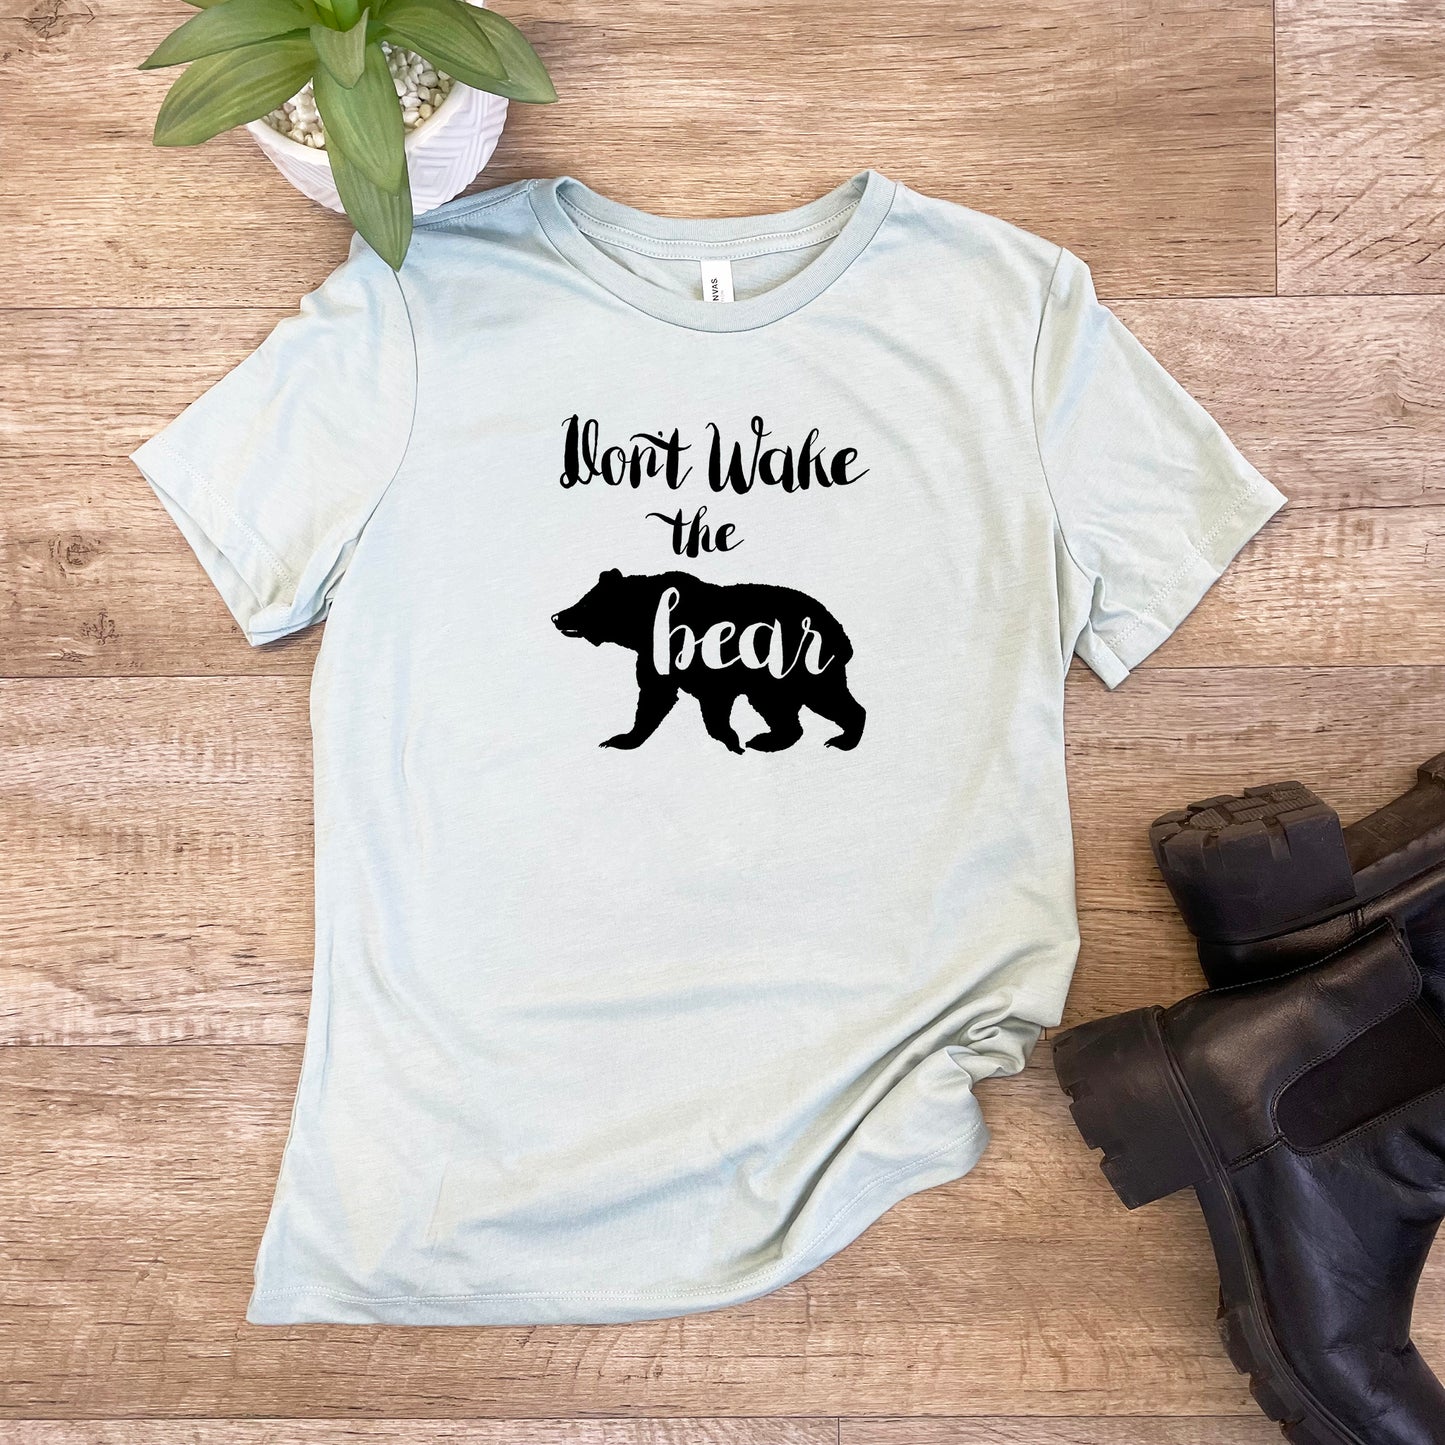 Don't Wake The Bear - Women's Crew Tee - Olive or Dusty Blue